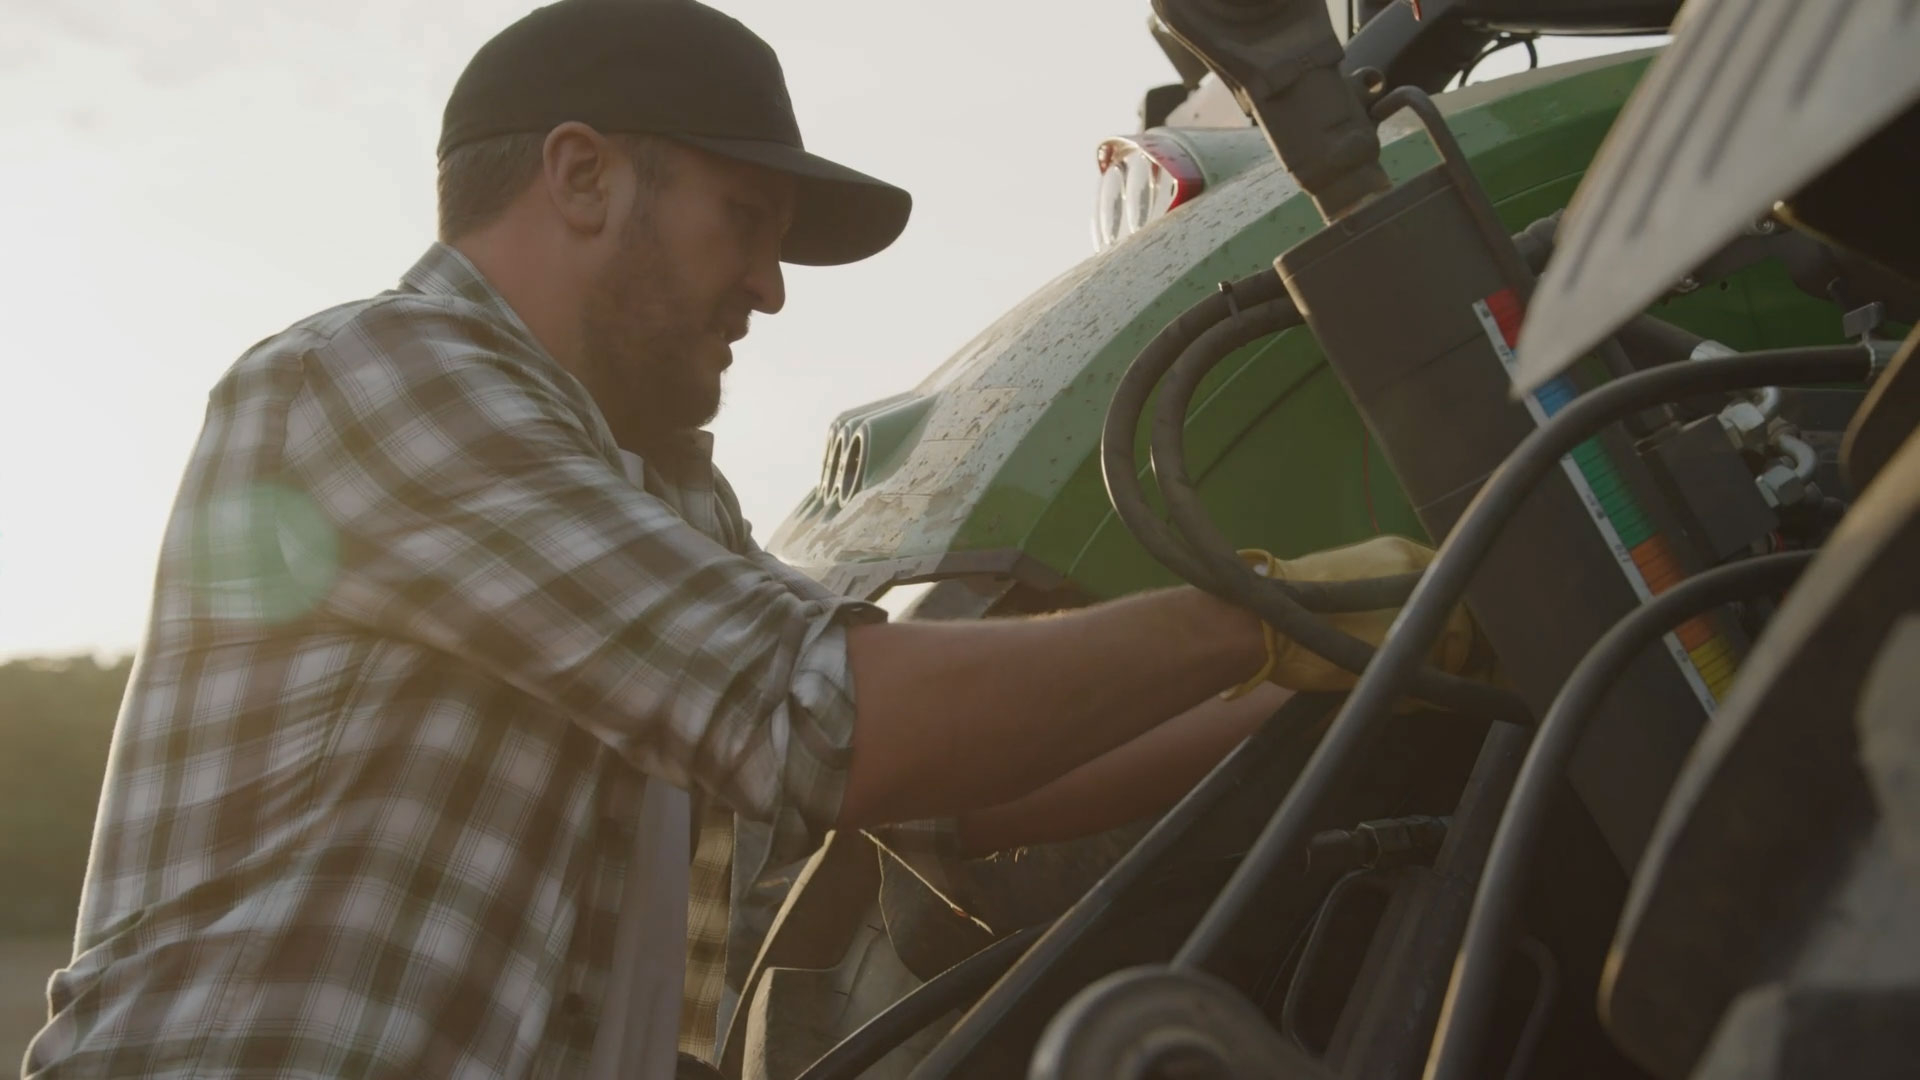 BROADCAST ONLY: Luke Bryan shares details of his popcorn collaboration with Fendt.